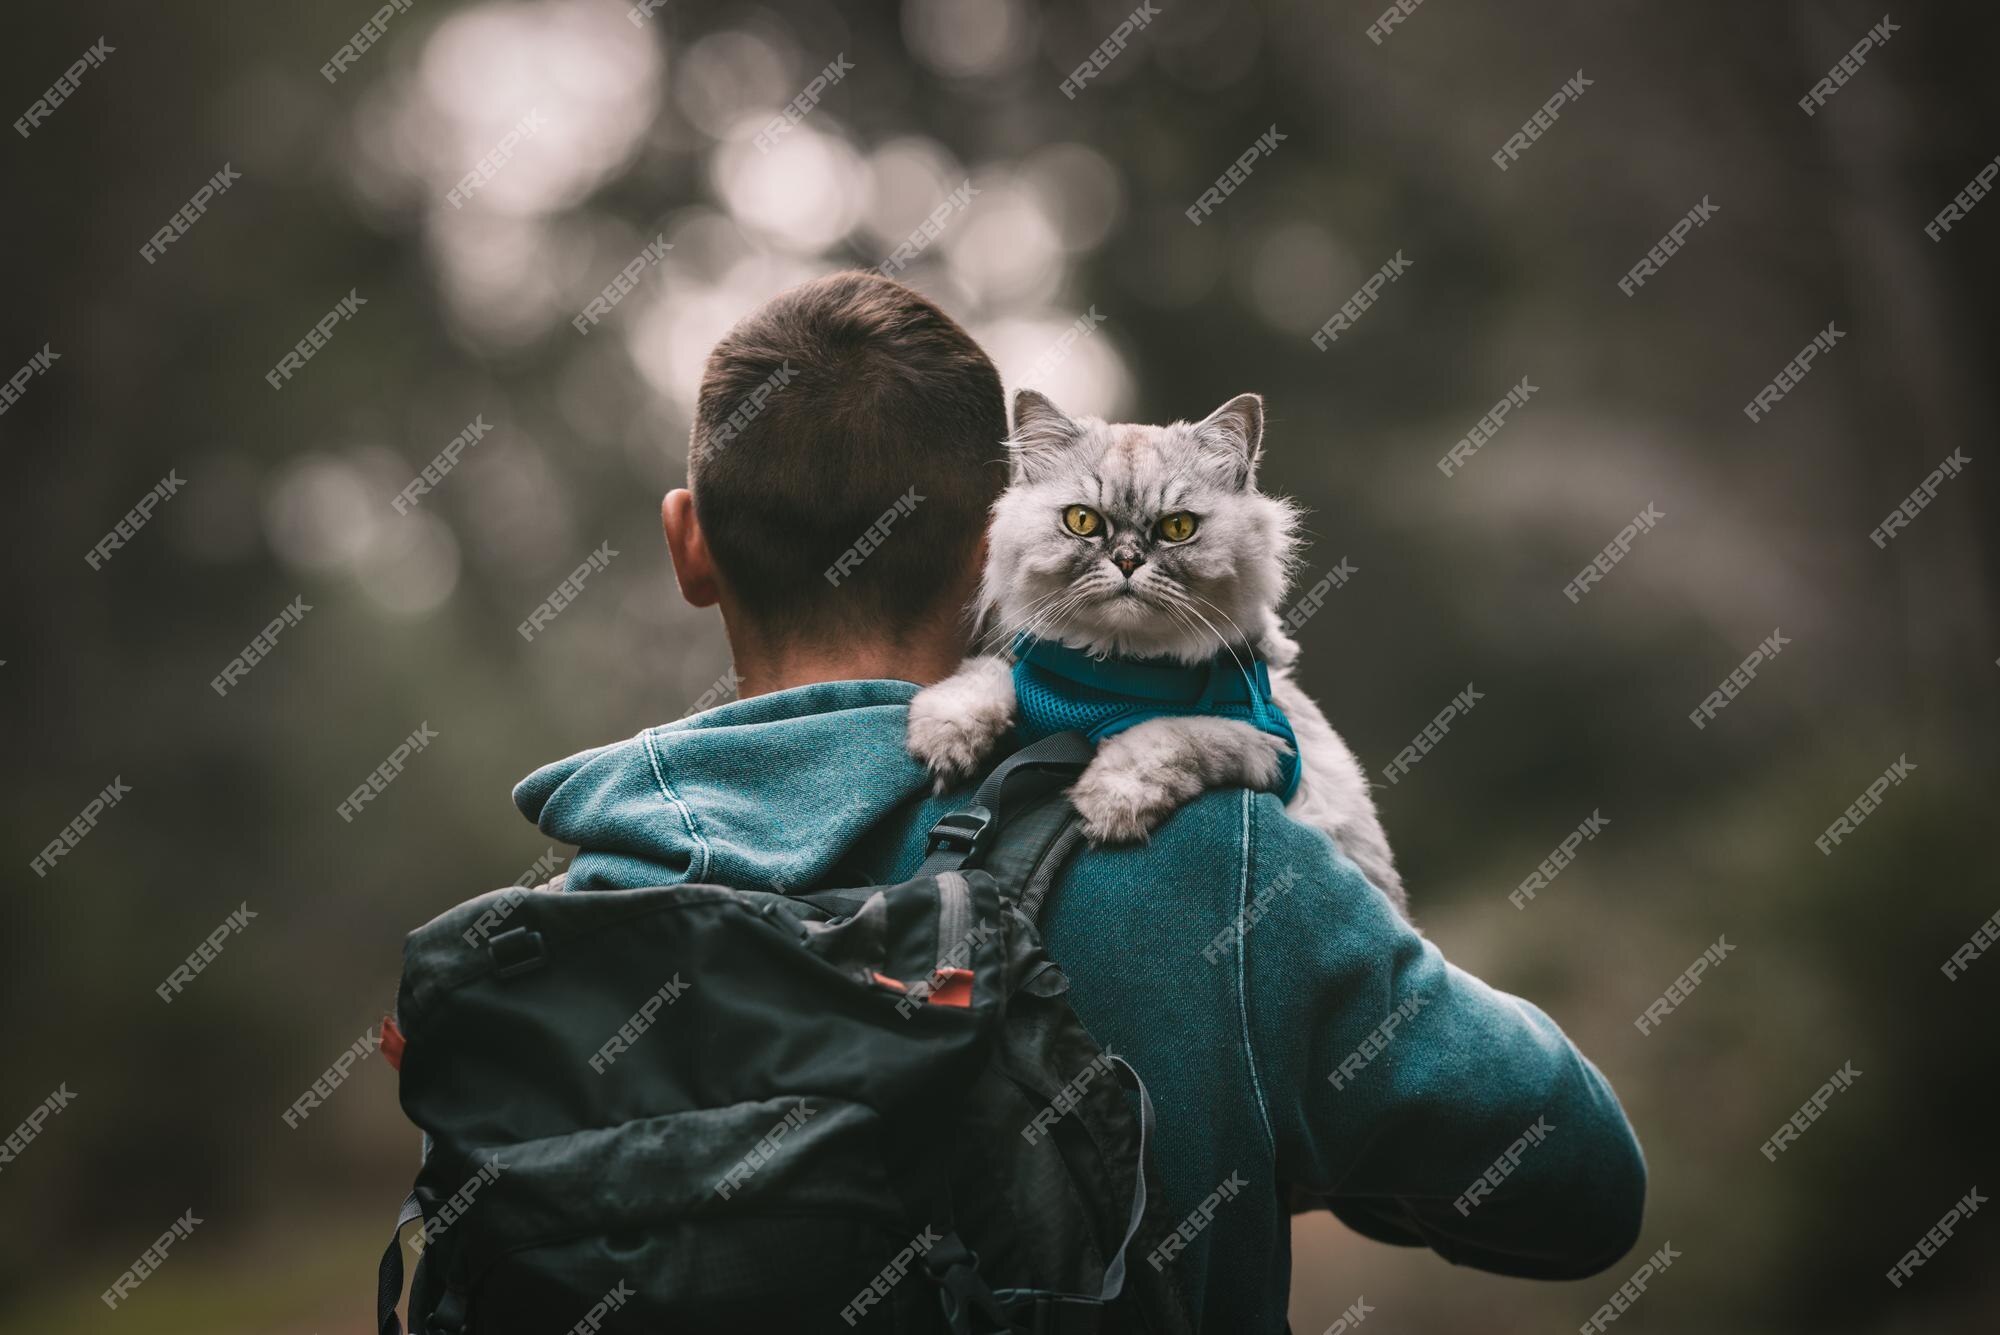 Premium Photo | Hiking with cat cat sitting on the owner shoulder outdoors  people and pets lifestyle